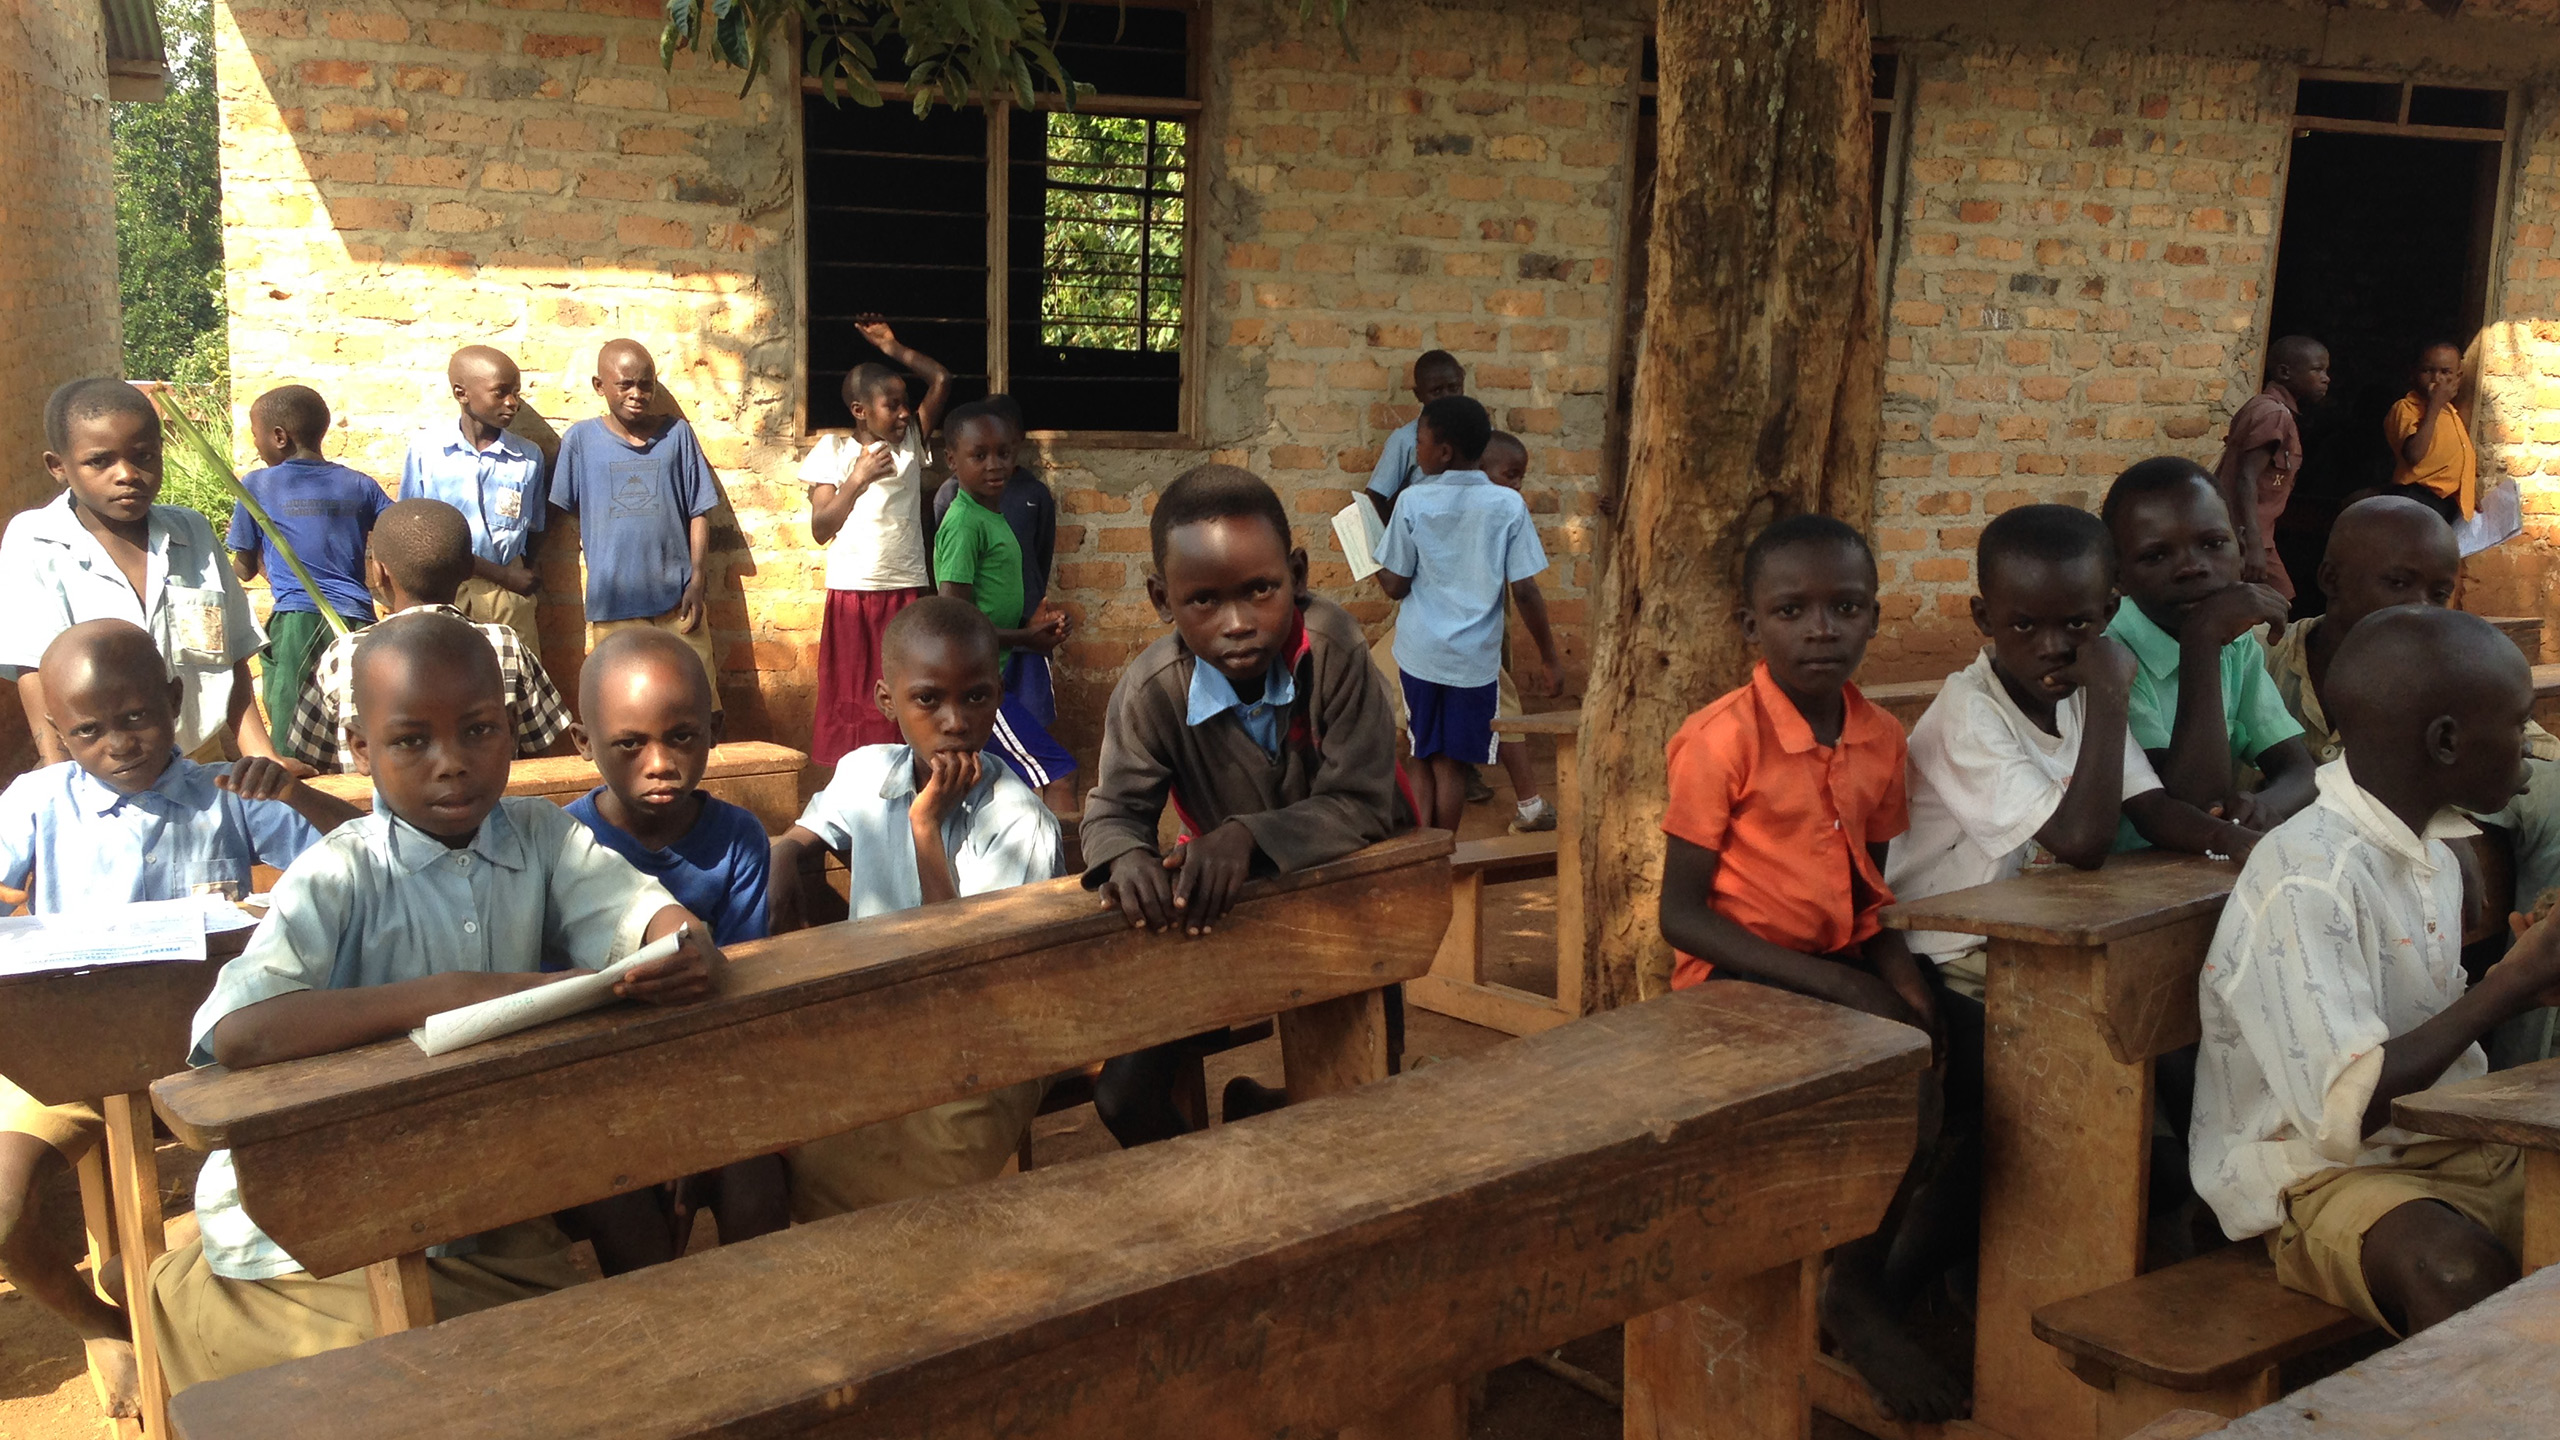 NGO project for class in Uganda